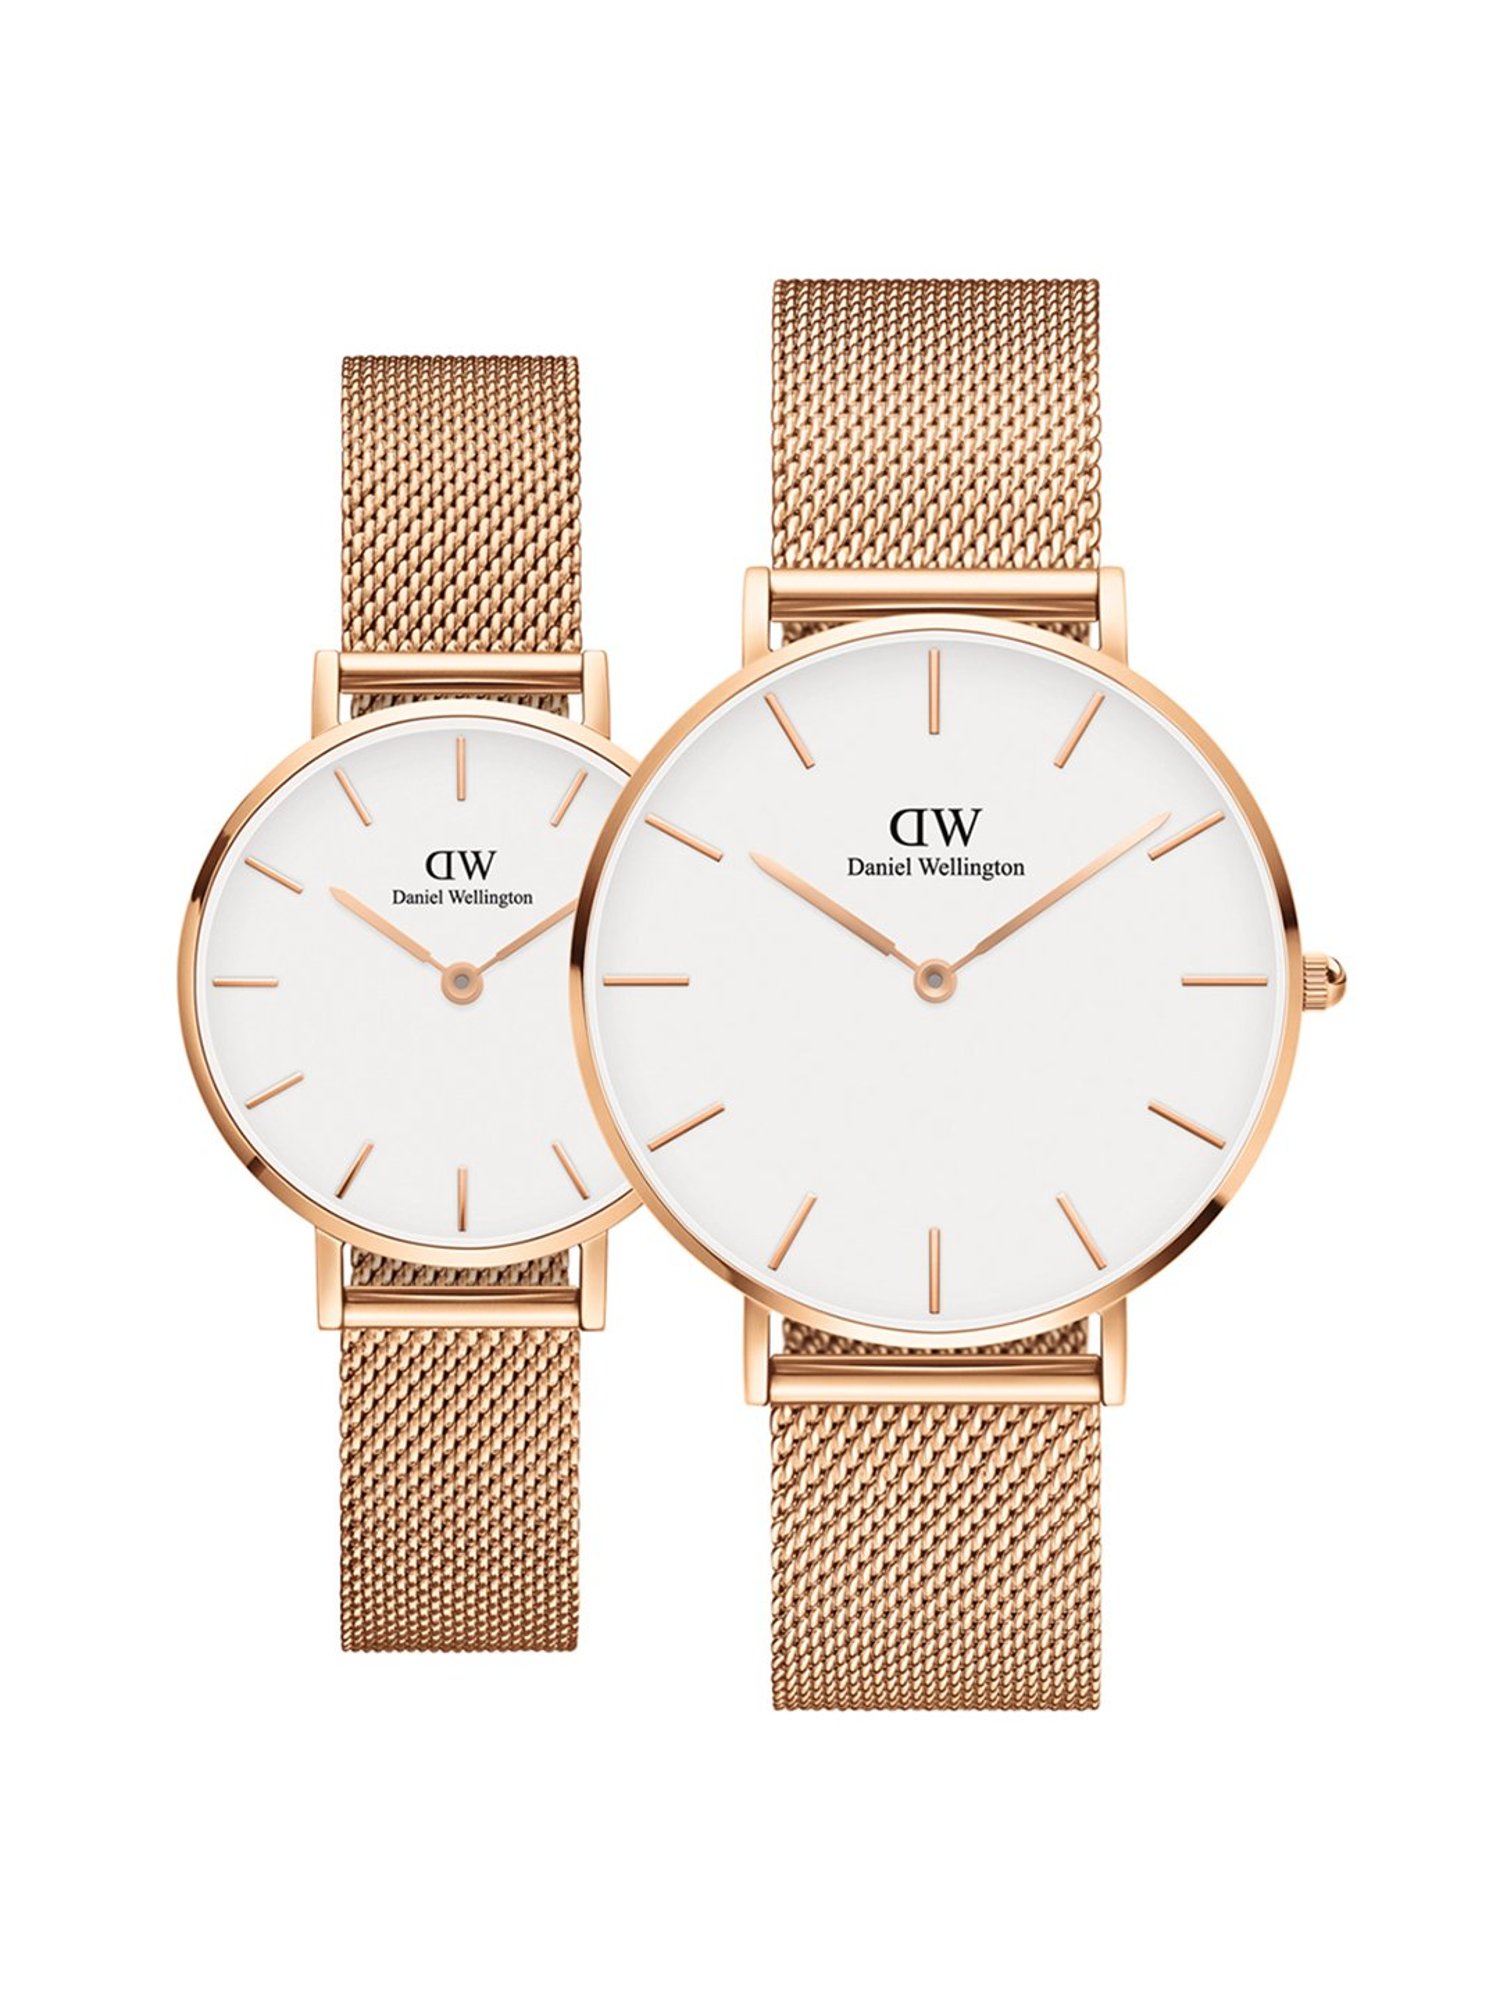 Buy Daniel DW00500520 Petite Melrose Analog Watch for Couples at Best Price @ Tata CLiQ